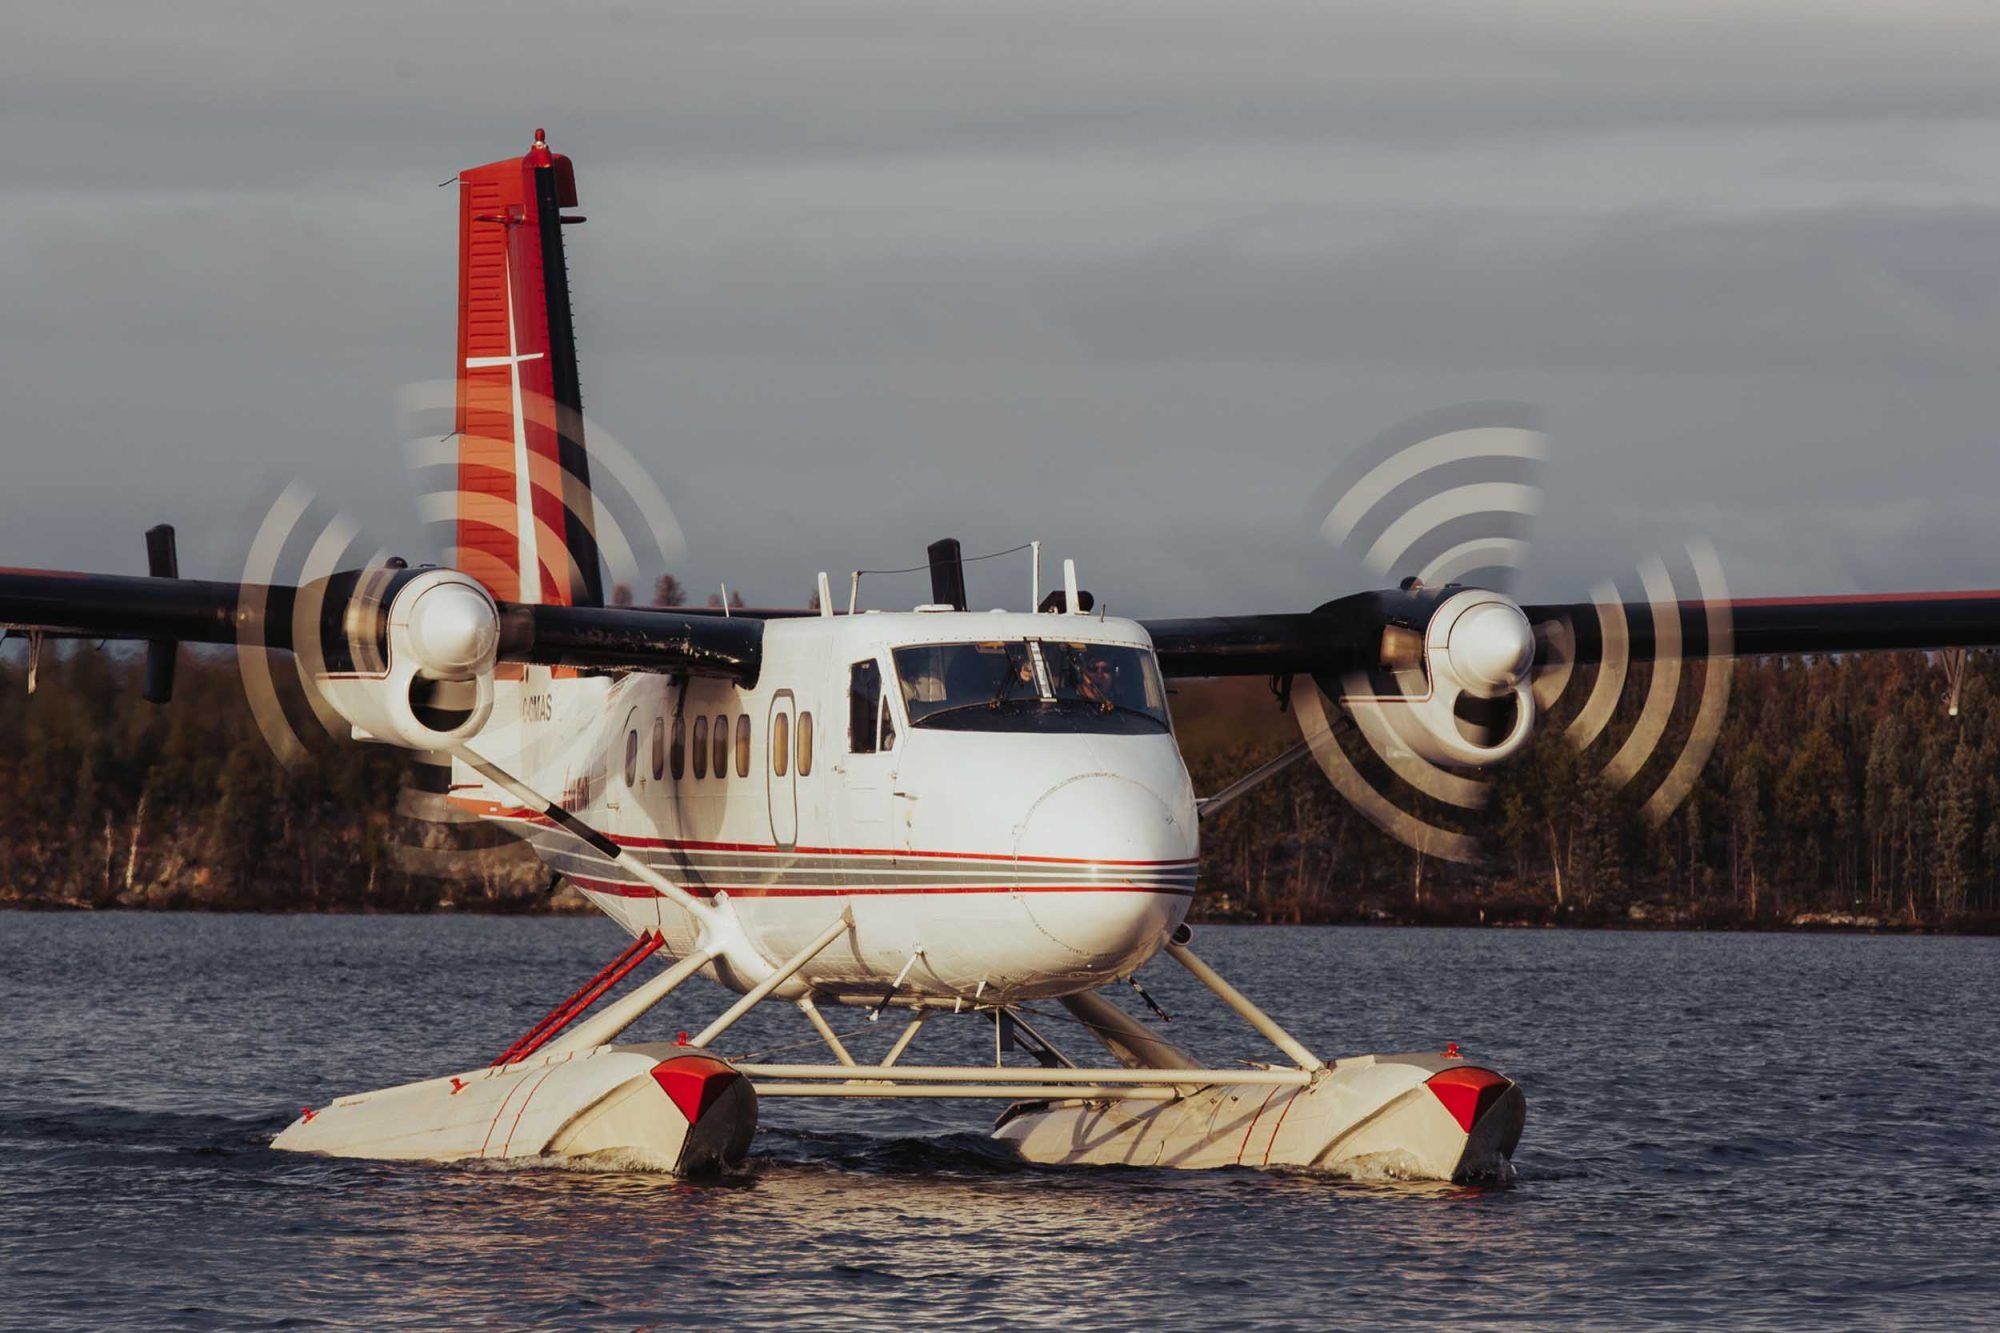 An Air Tindi Twin Otter aircraft in a body of water.